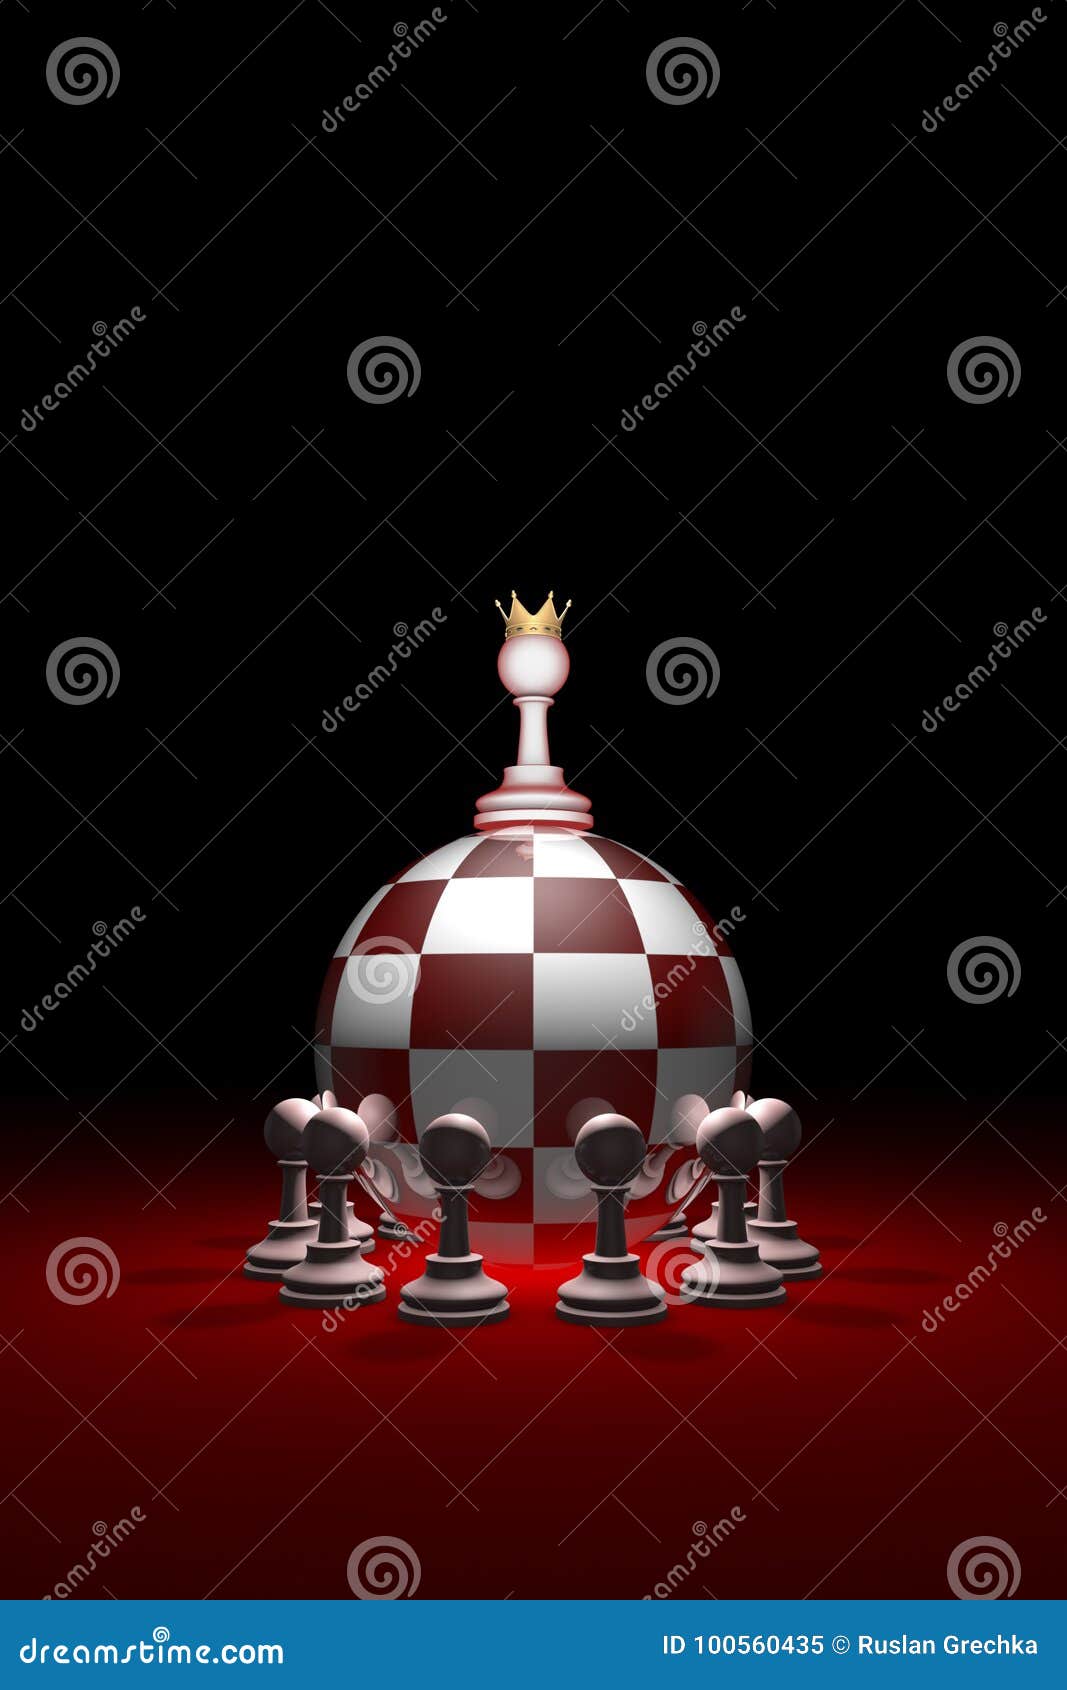 monarchy. power without oppositions. chess metaphor. 3d render